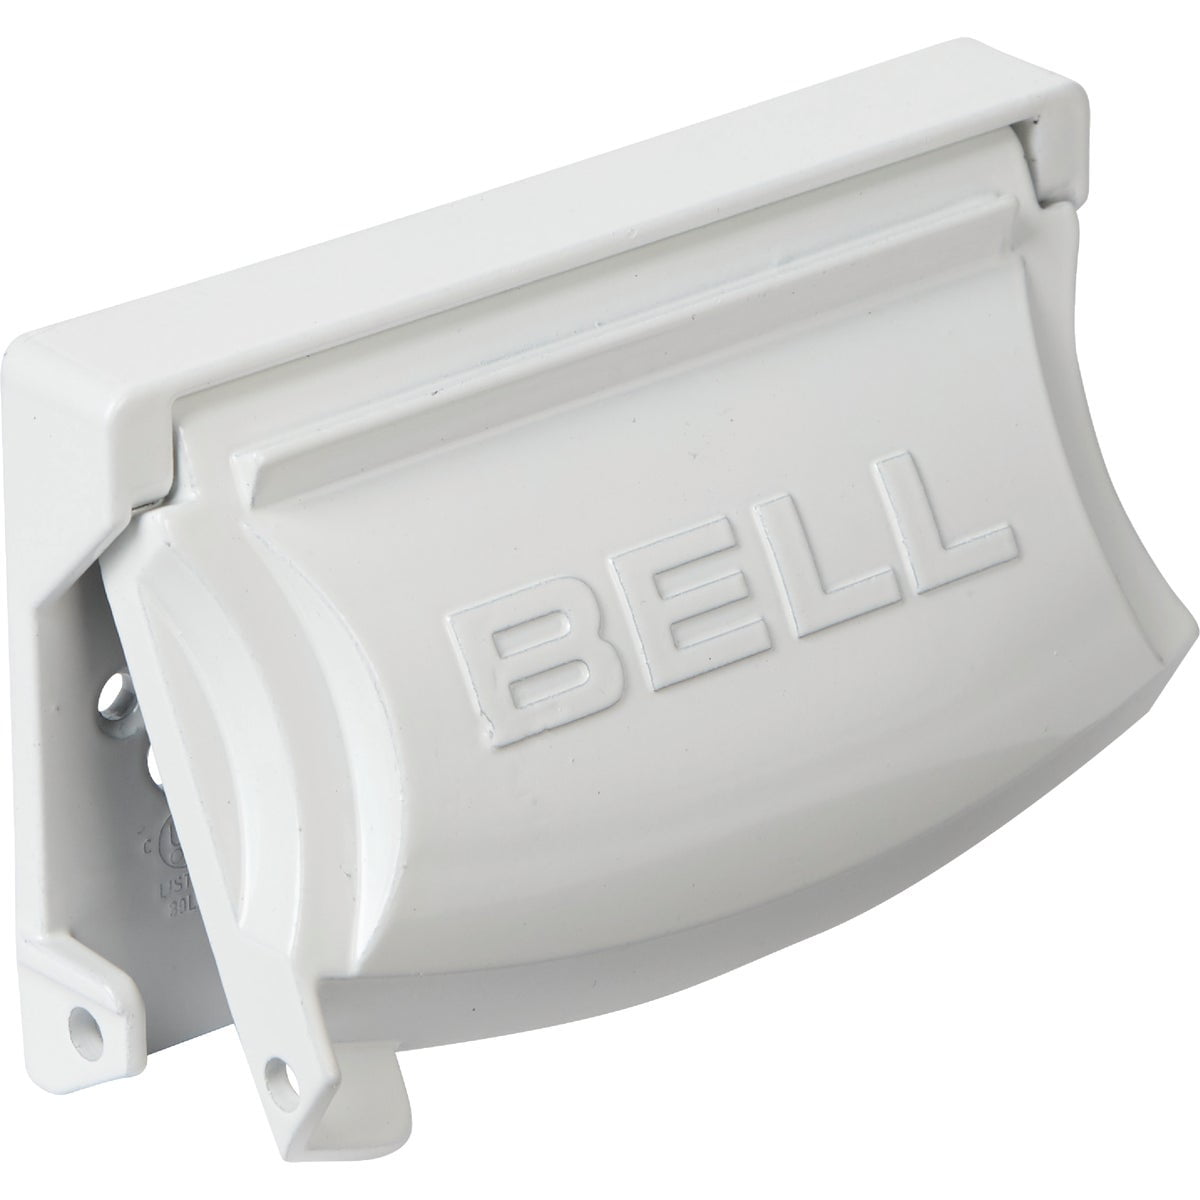 Hubbell-Bell MX1250W Weatherproof Single Outlet Cover Outdoor Receptacle New 